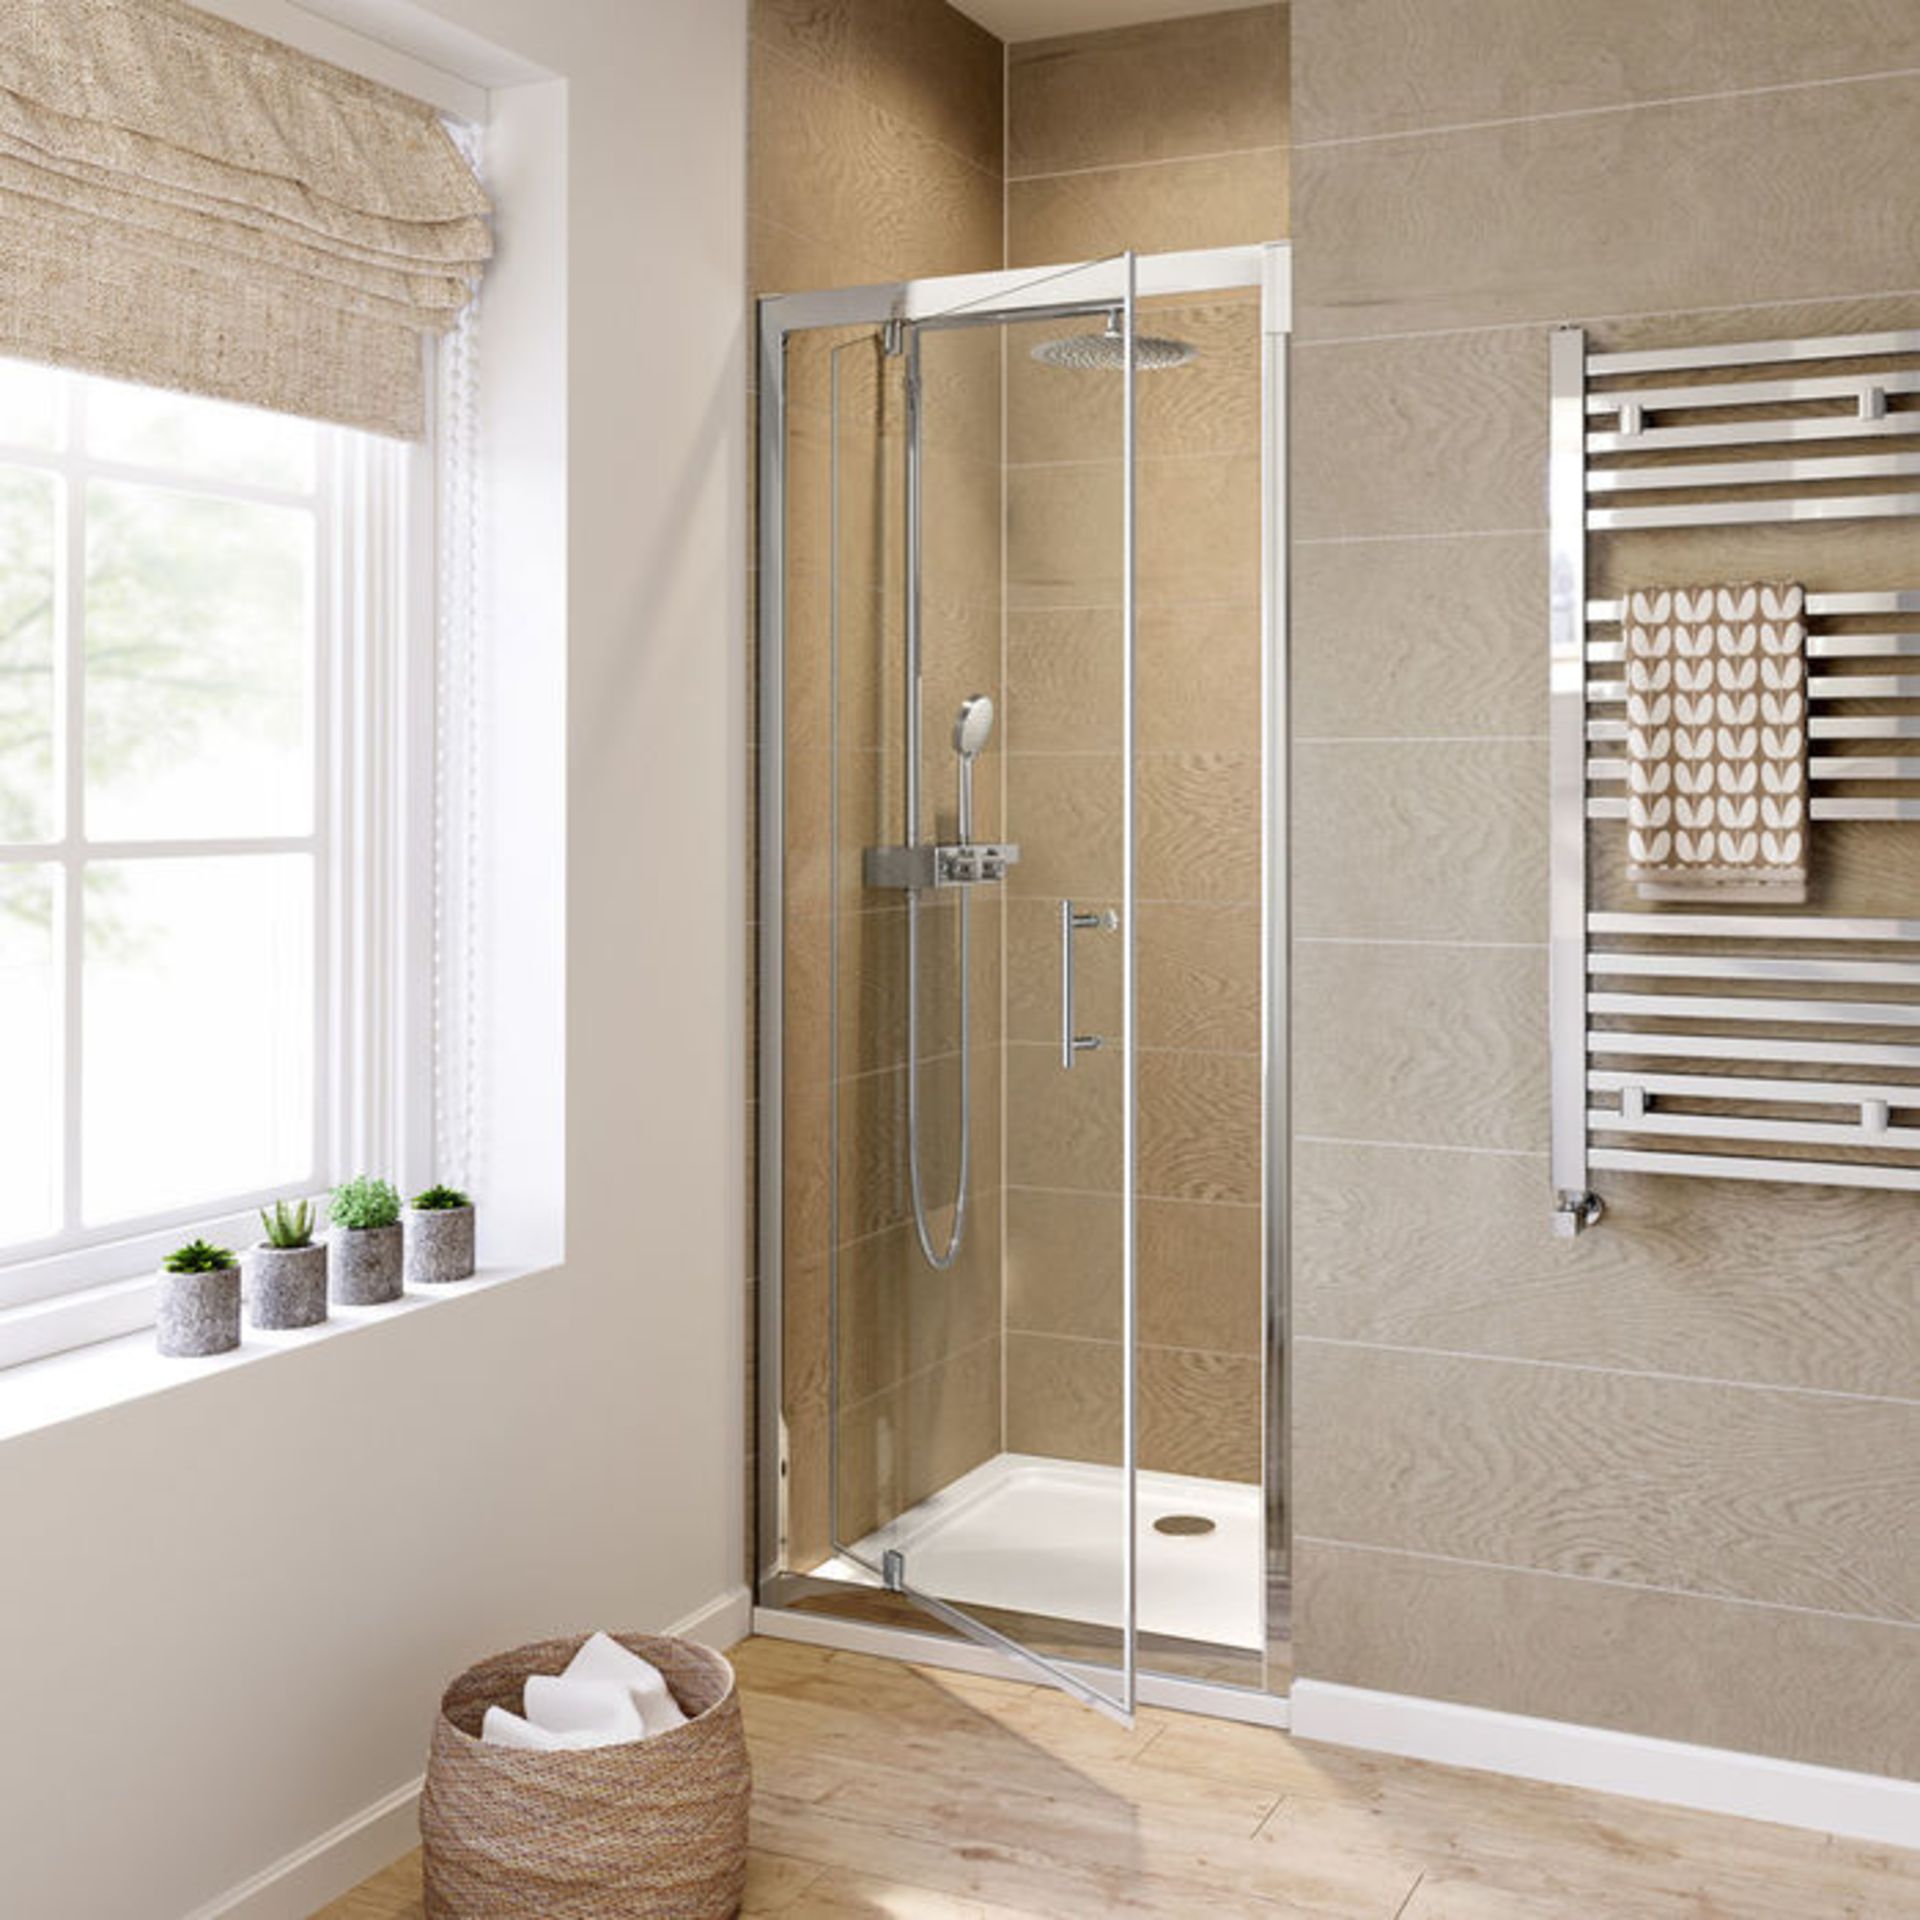 (VN27) 900mm - 6mm - Elements Pivot Shower Door. RRP £299.99. 6mm Safety Glass Fully waterproof - Image 3 of 5